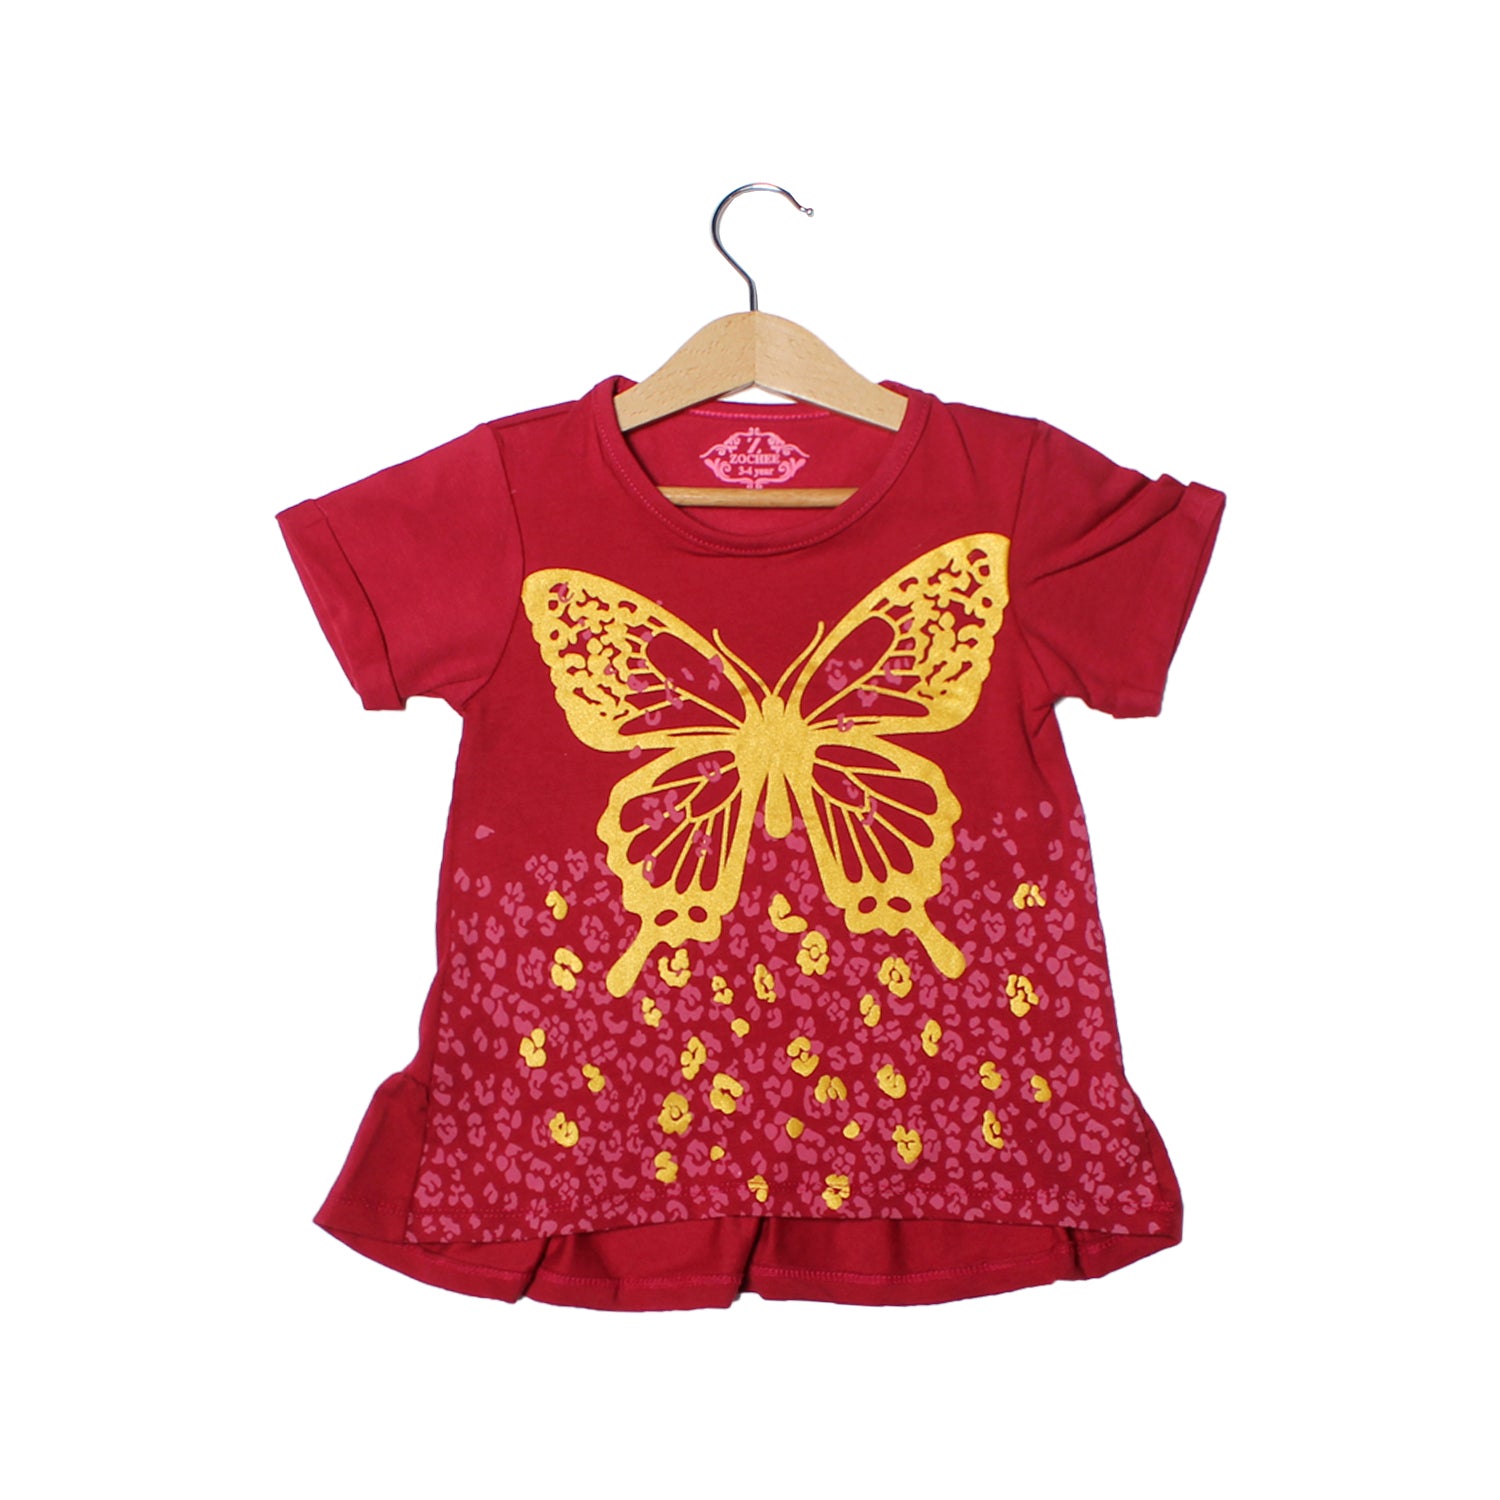 NEW BLUSH PINK BUTTERFLY PRINTED T-SHIRT TOP FOR GIRLS